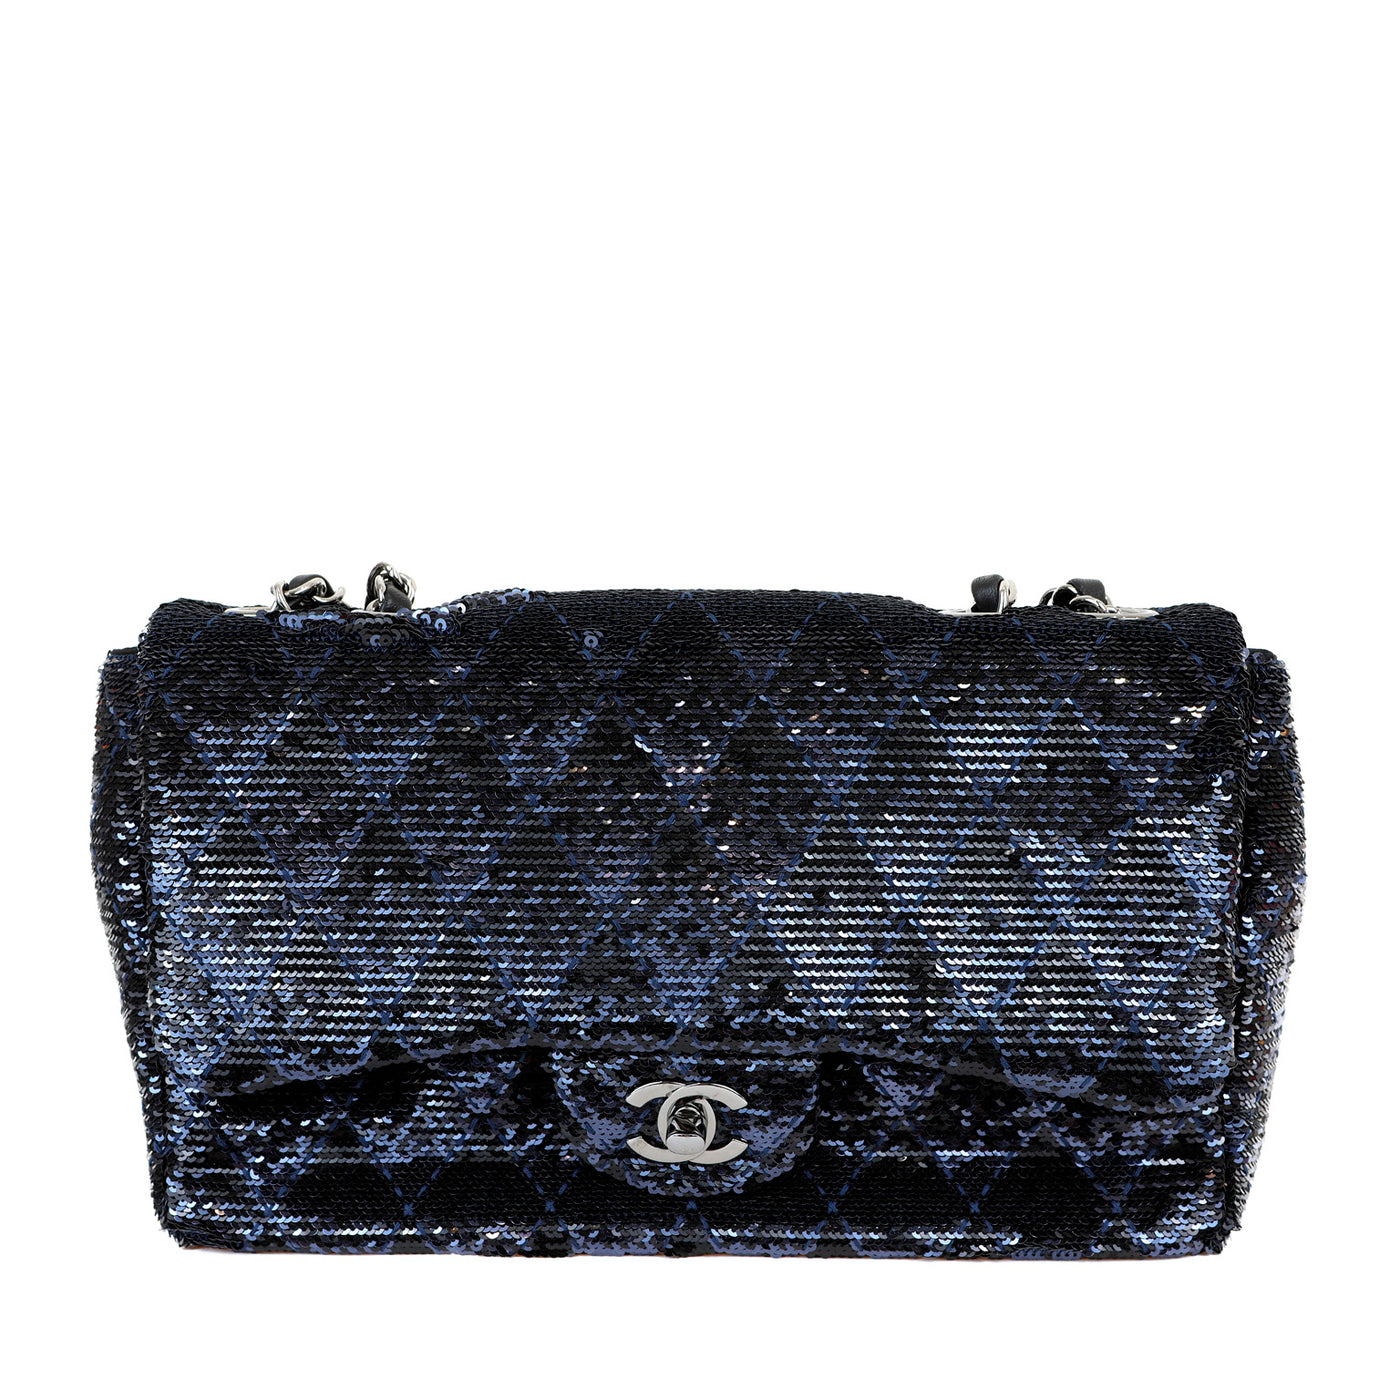 Chanel Black/Navy Sequin Classic Flap Bag w/ Silver Hardware